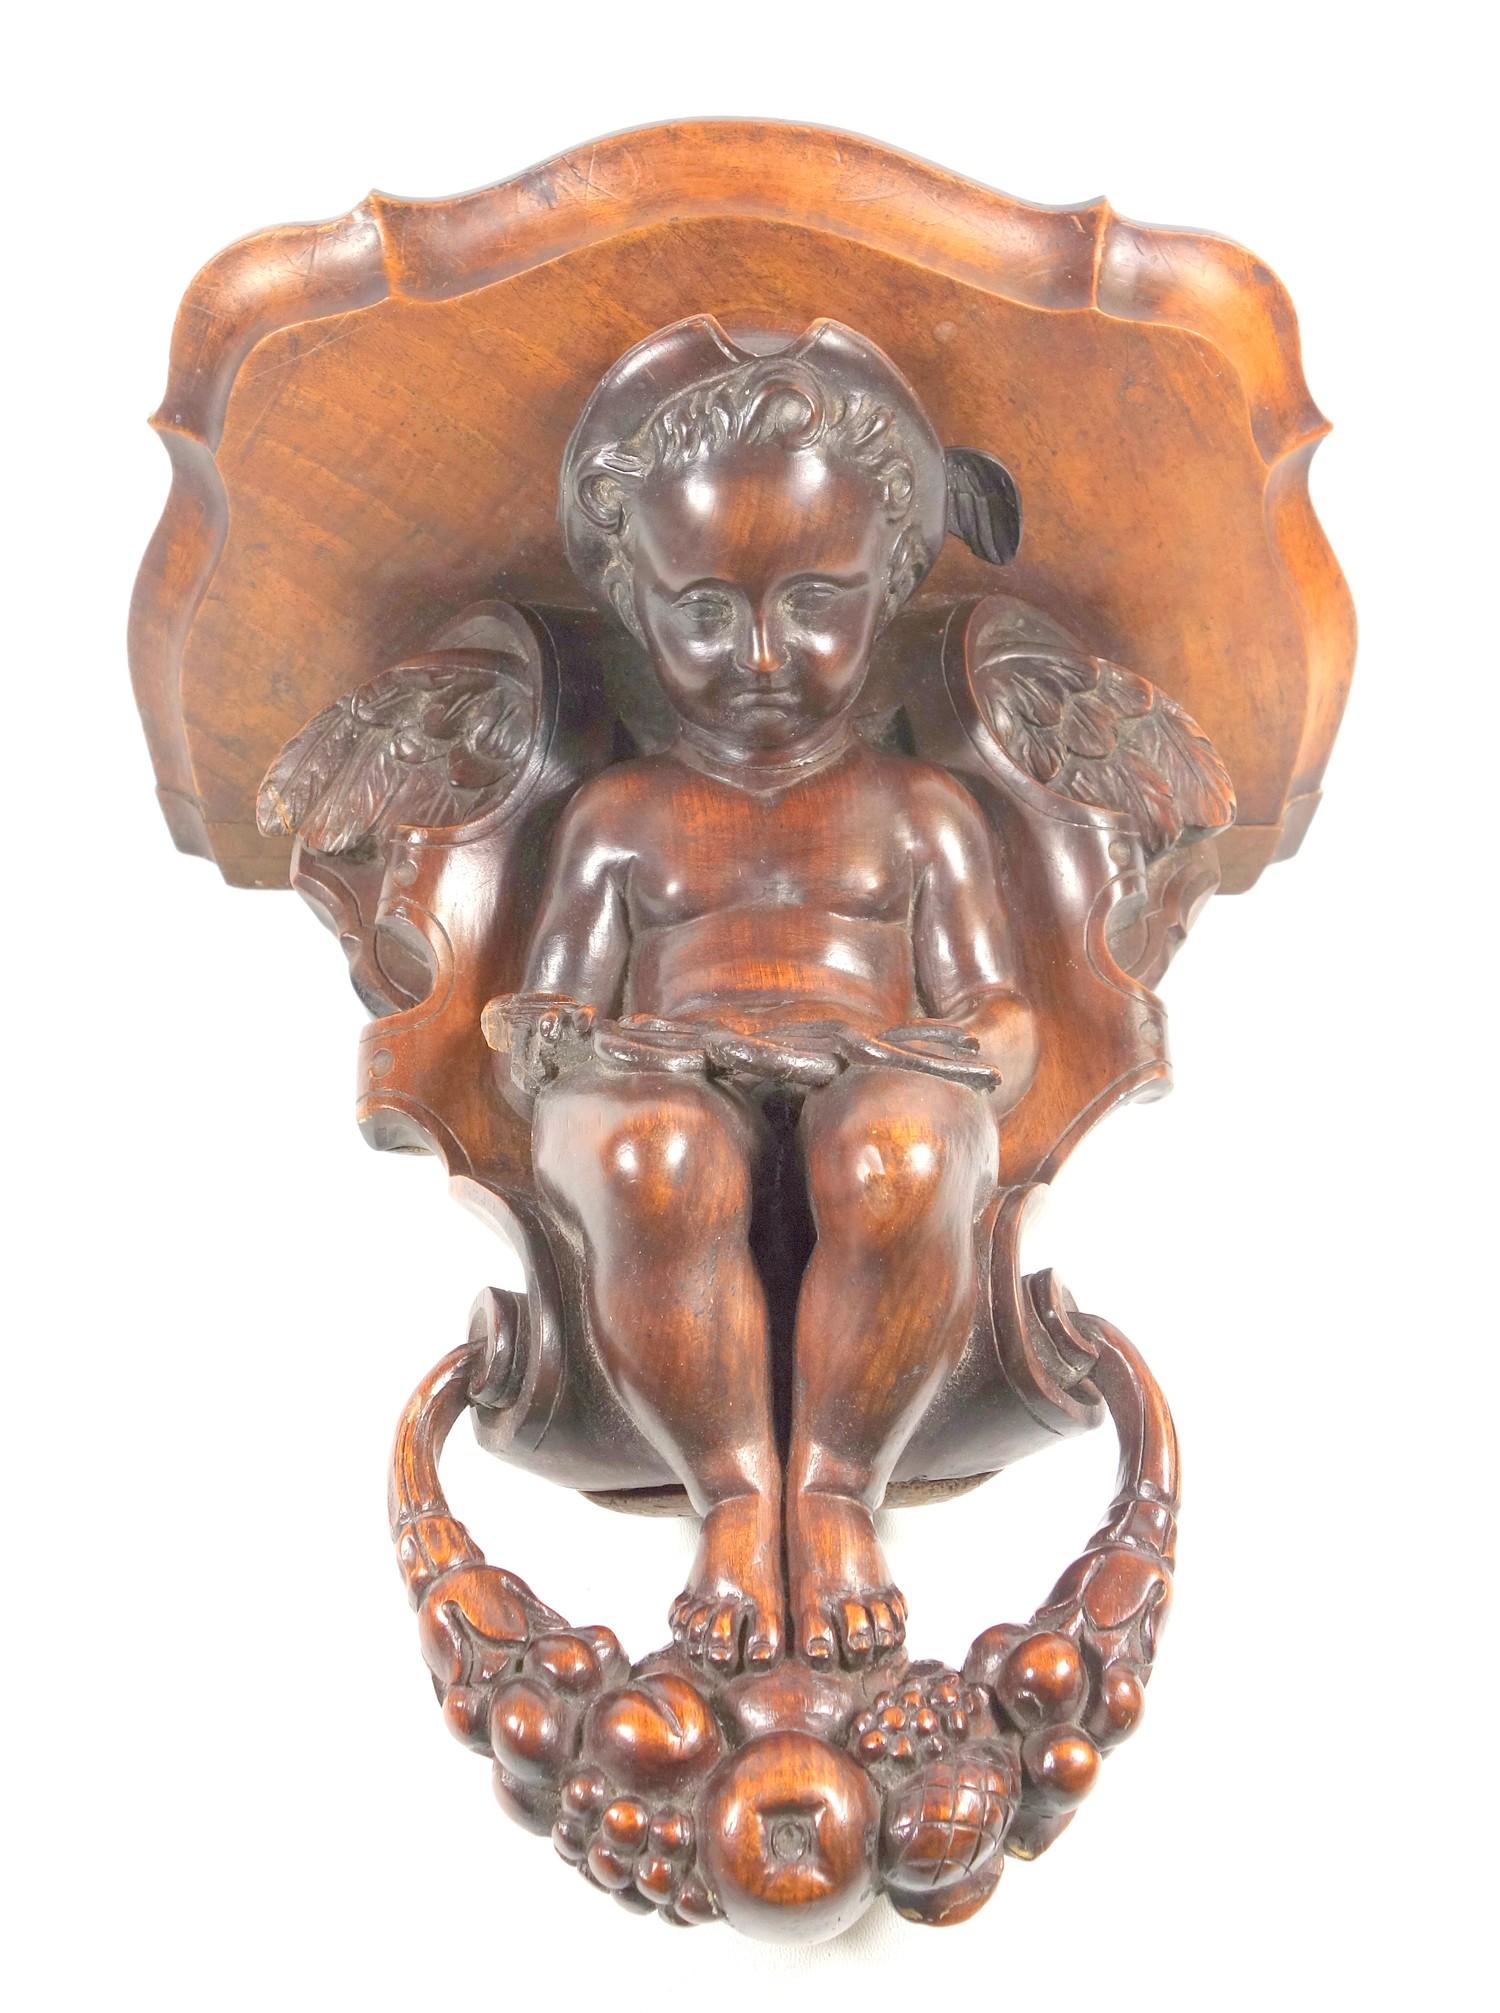 19TH CENTURY ITALIAN CARVED WALNUT WALL BRACKET WITH A FIGURE OF MERCURY SEATED AND HOLDING A - Image 6 of 9